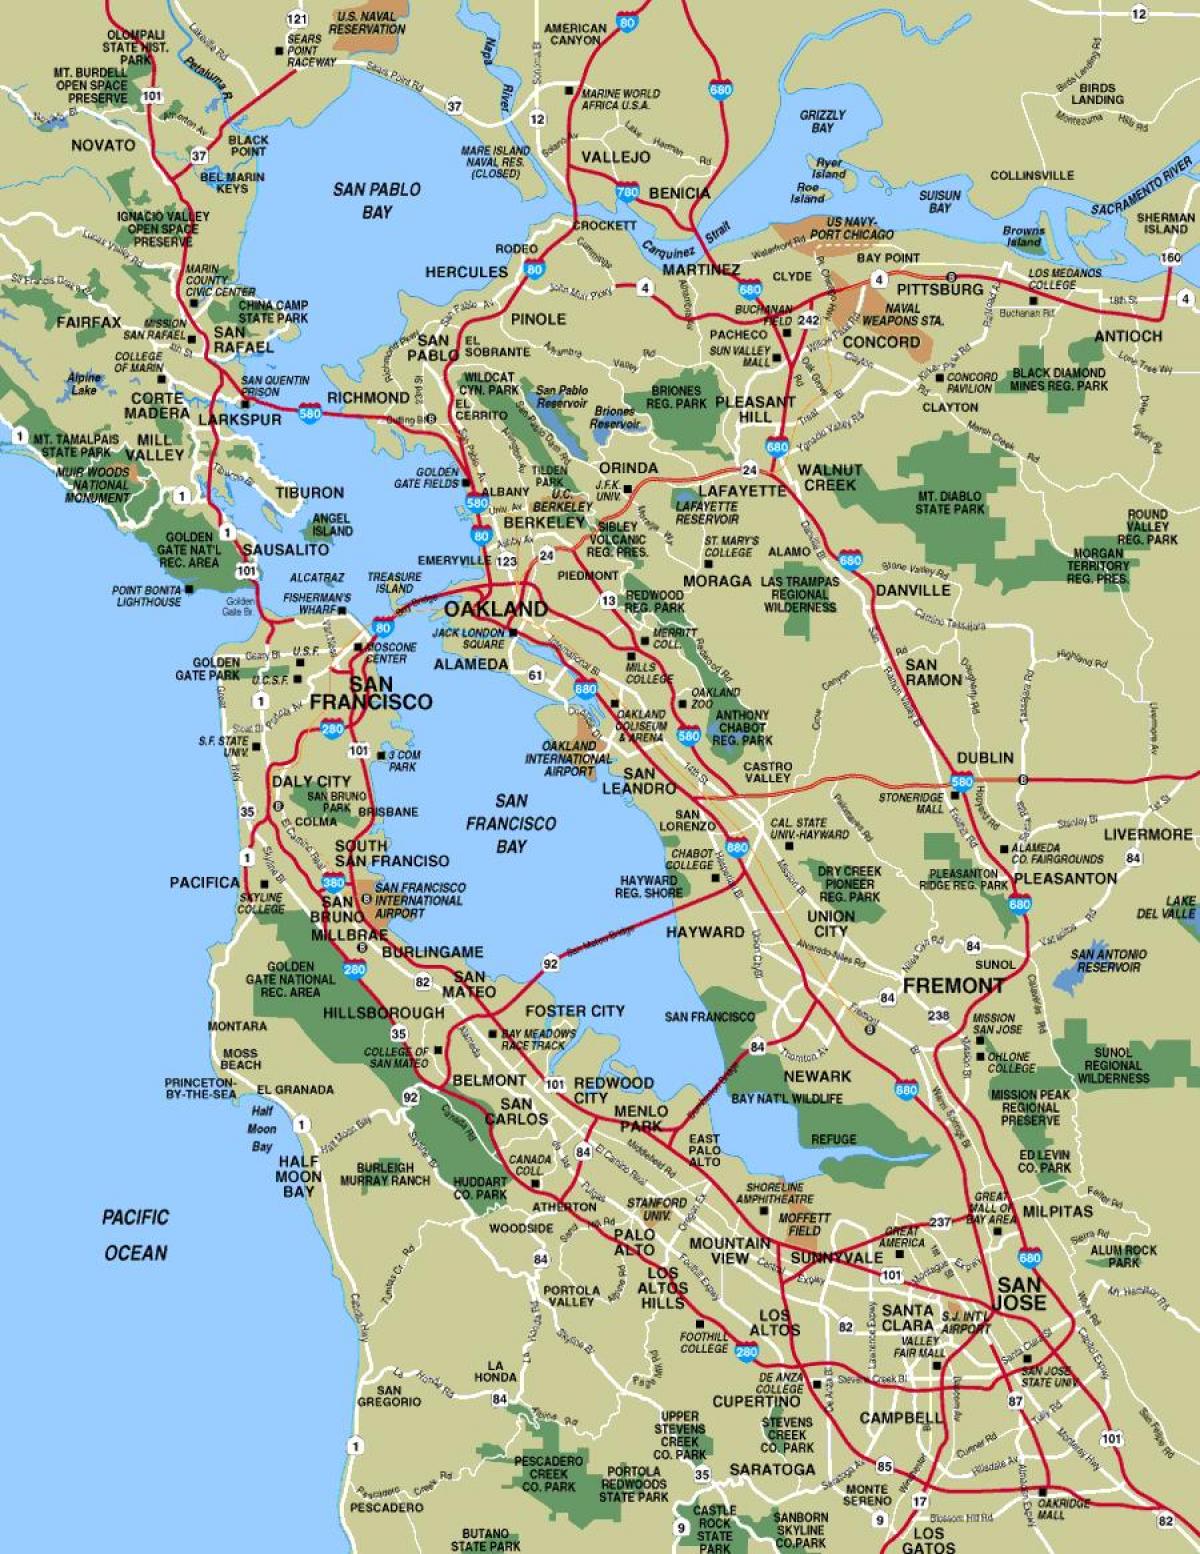 Map of greater San Francisco area